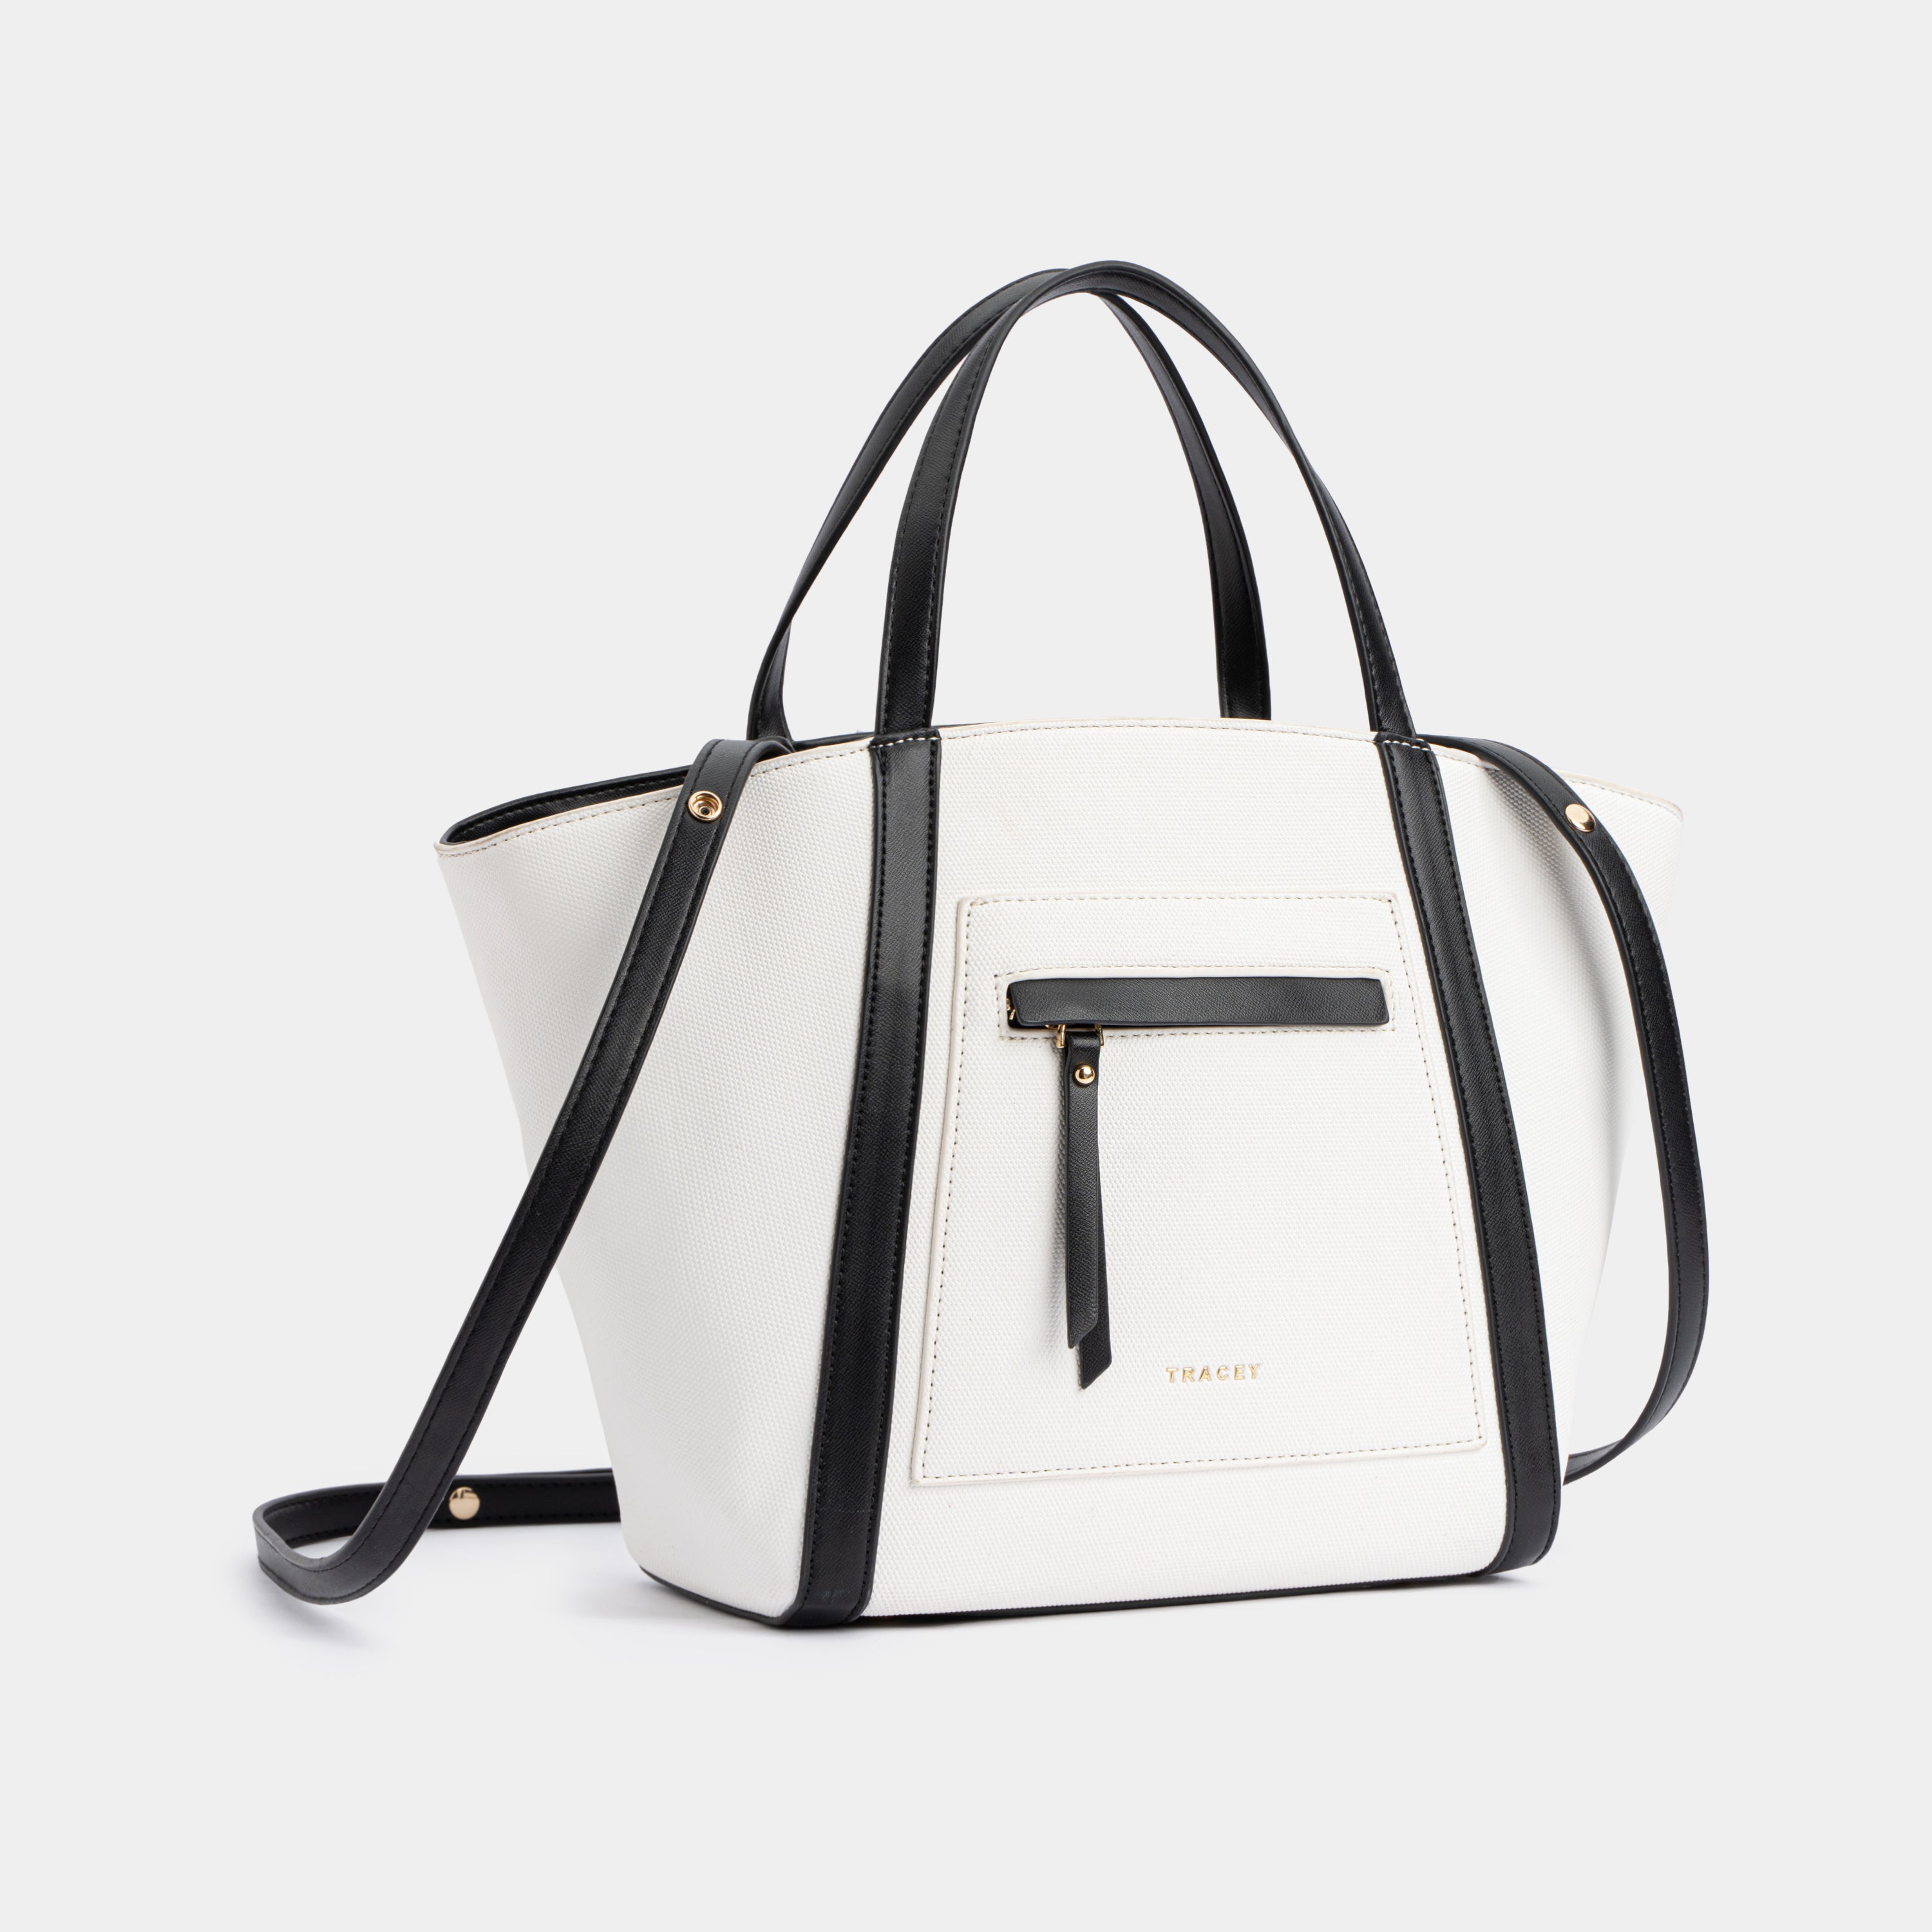 Tracey x Save The Tapir Tote Bag With Shoulder Strap